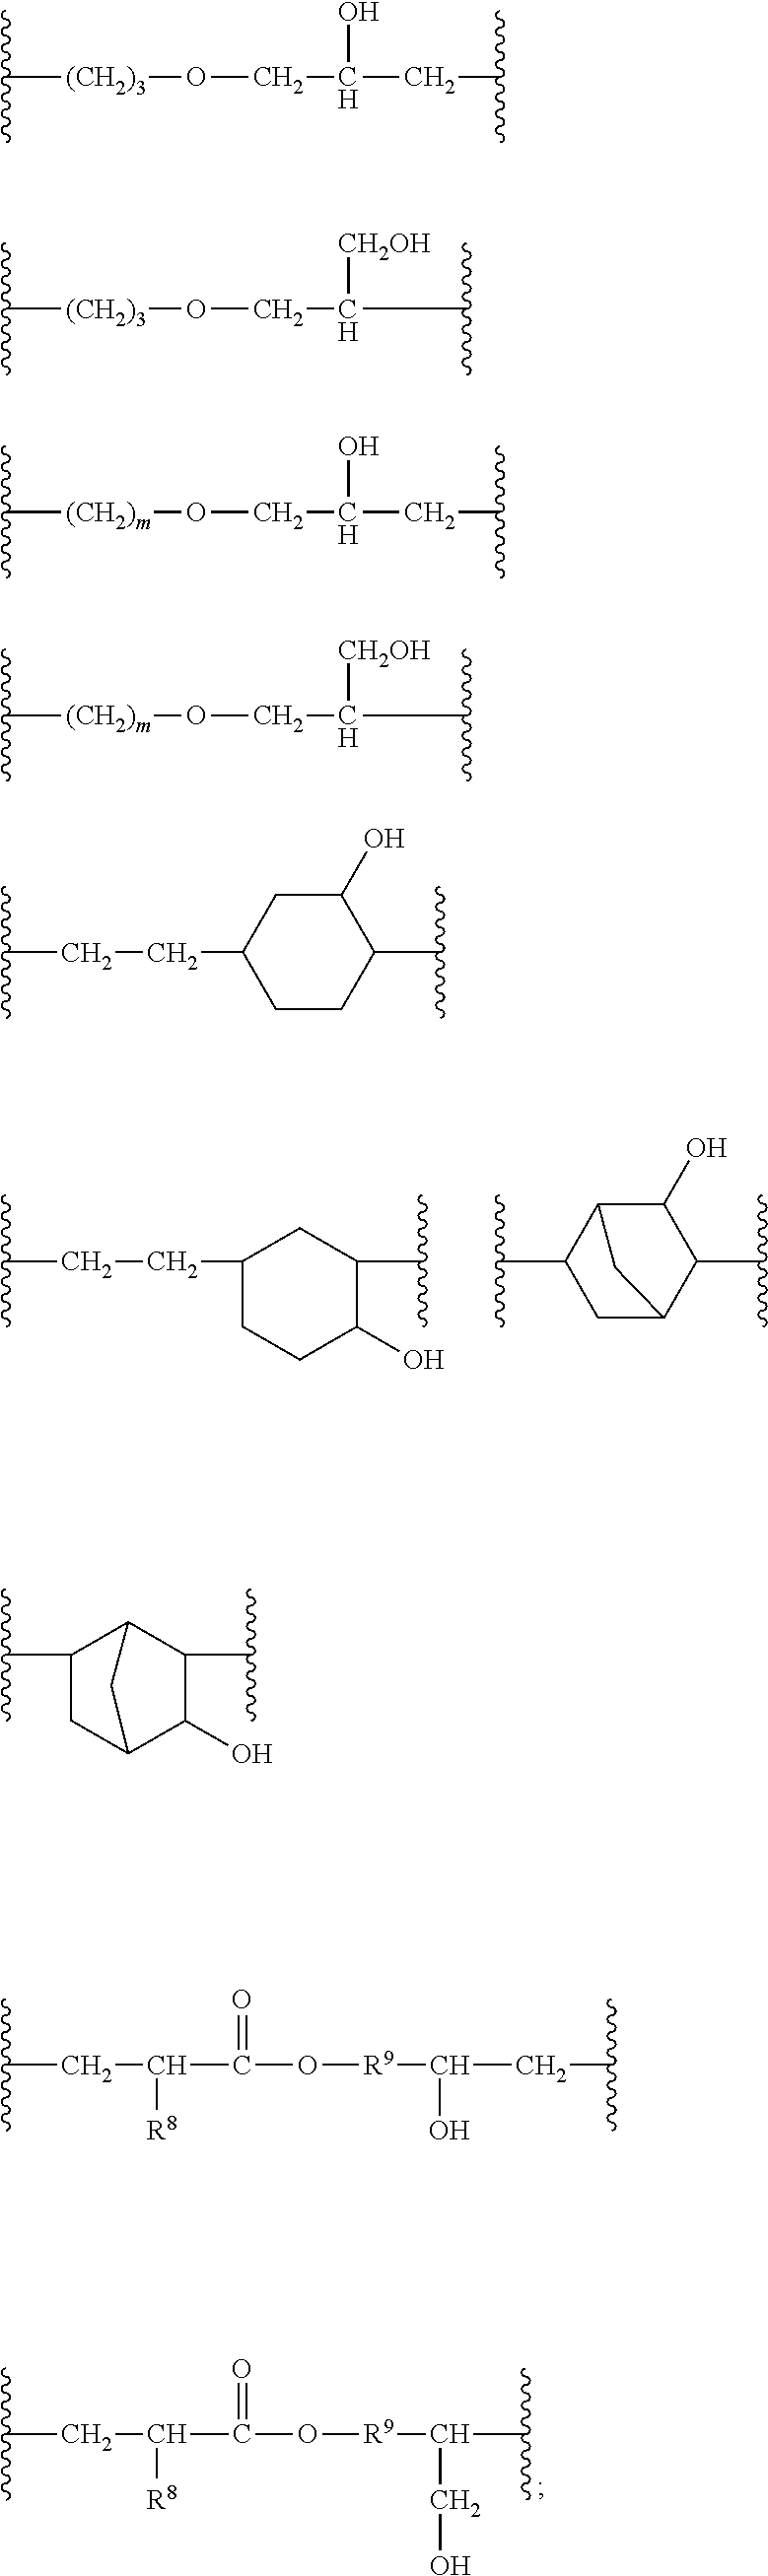 Novel polysiloxanes having quaternary ammonium groups, method for producing same and use thereof in formulations for cleansing and care